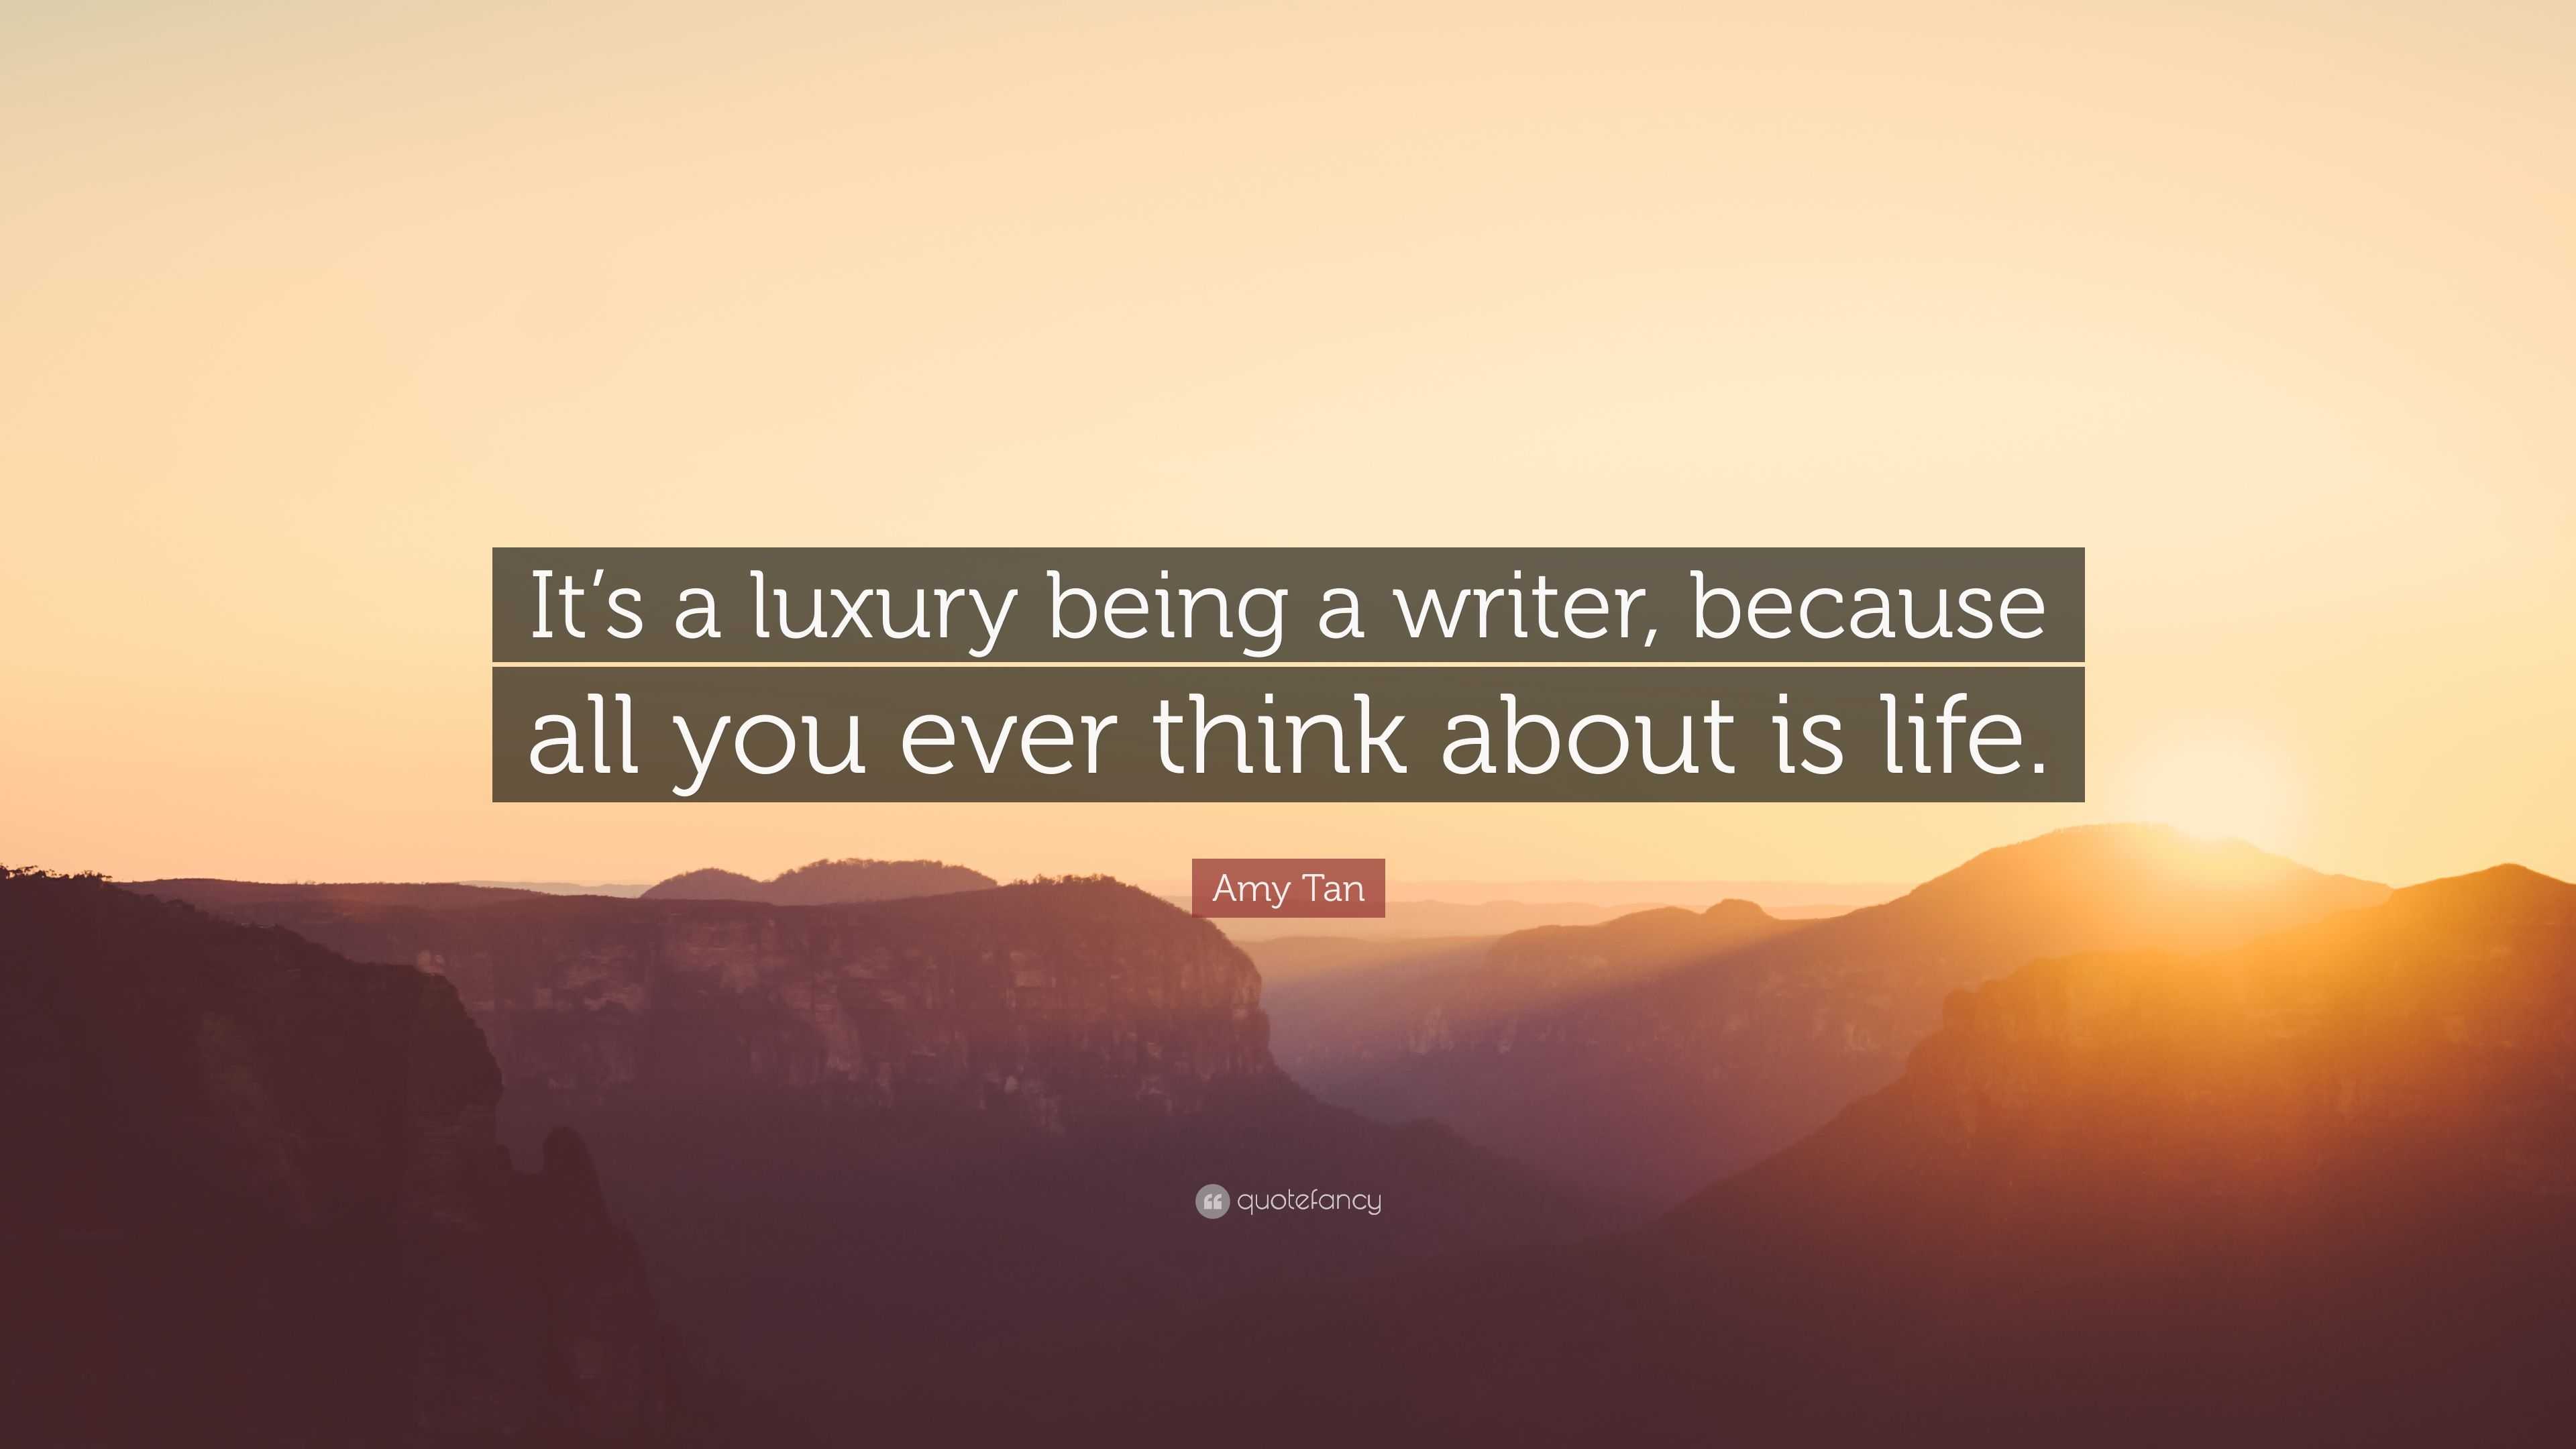 Amy Tan Quote: “It’s a luxury being a writer, because all you ever ...